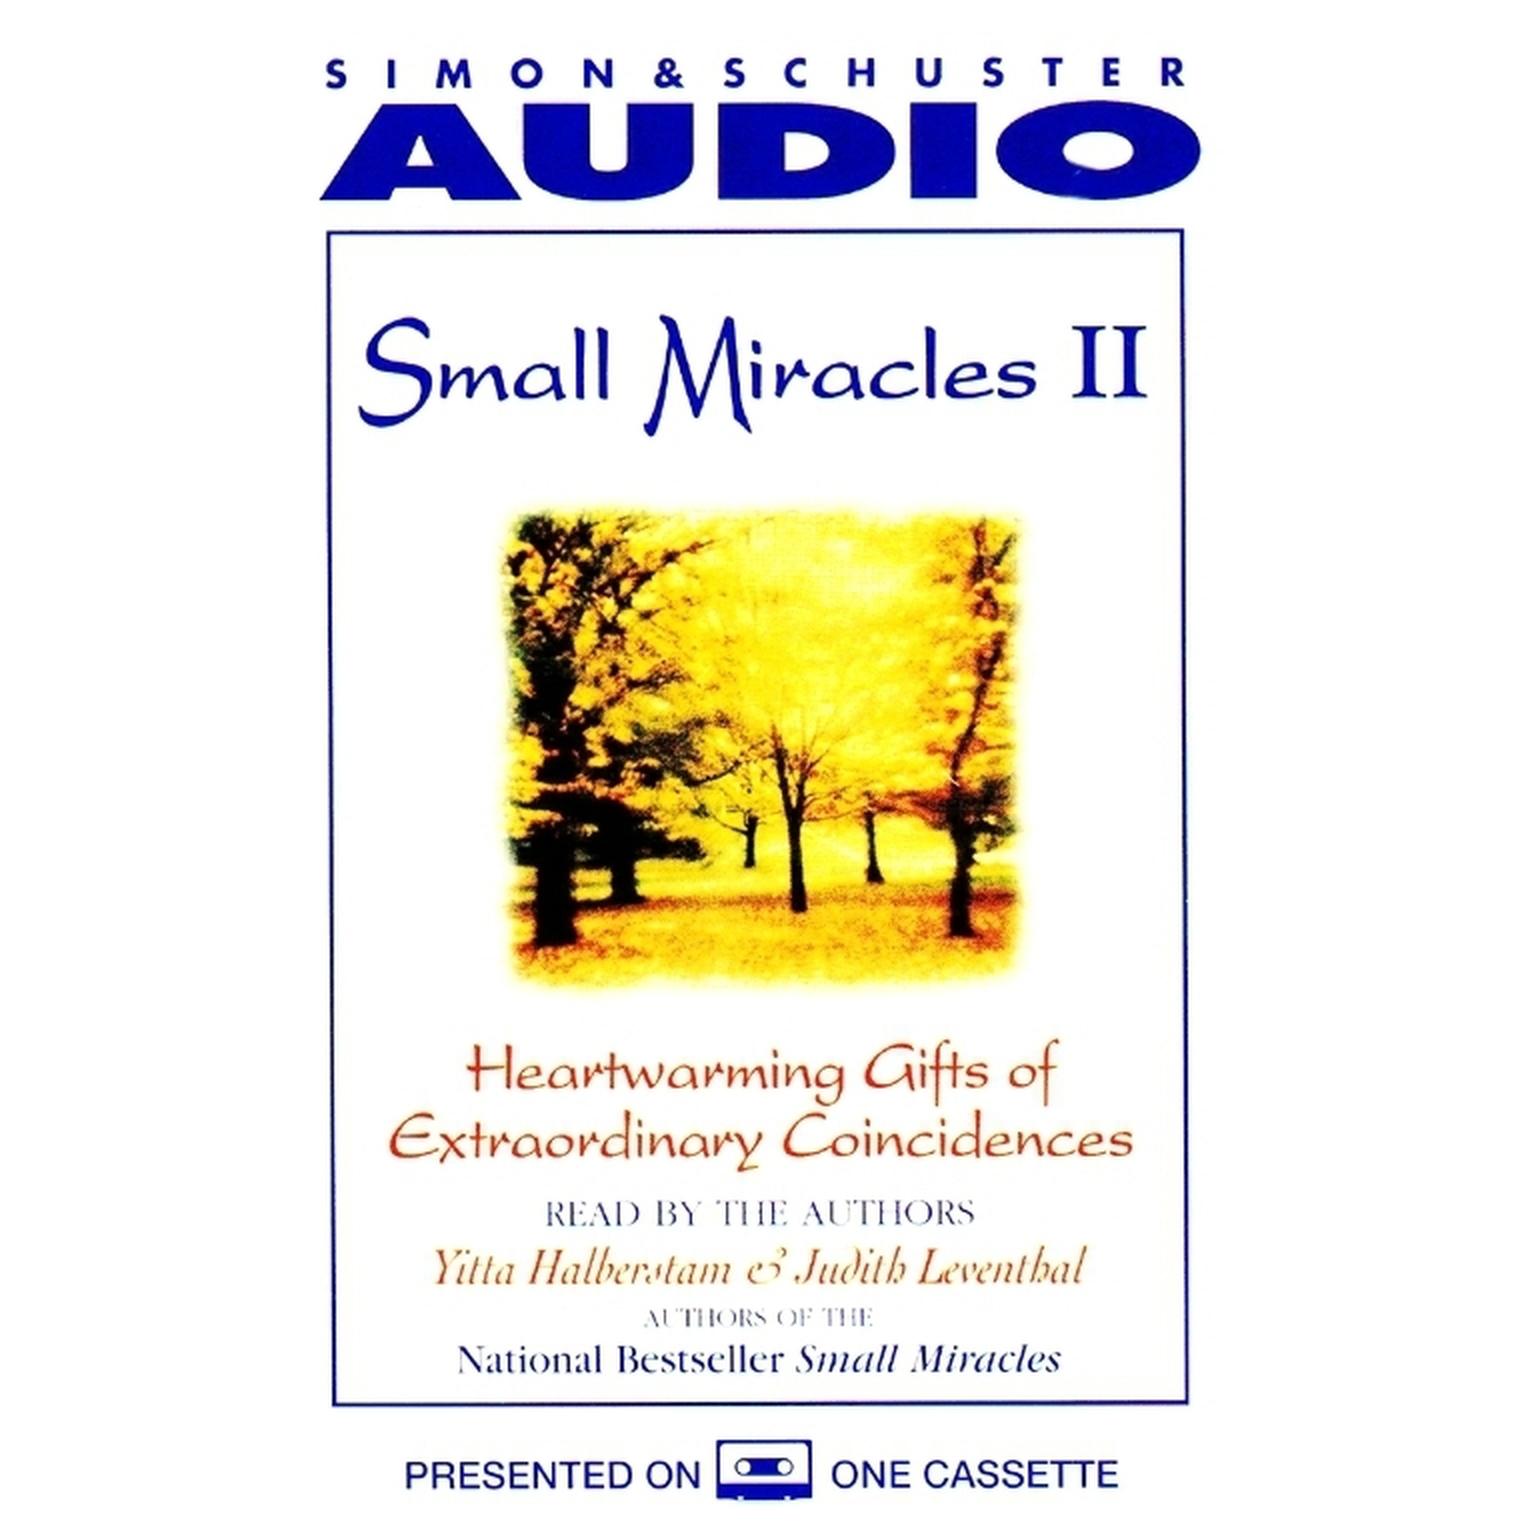 Small Miracles II (Abridged): Heartwarming Gifts of Extraordinary Coincidence Audiobook, by Yitta Halberstam